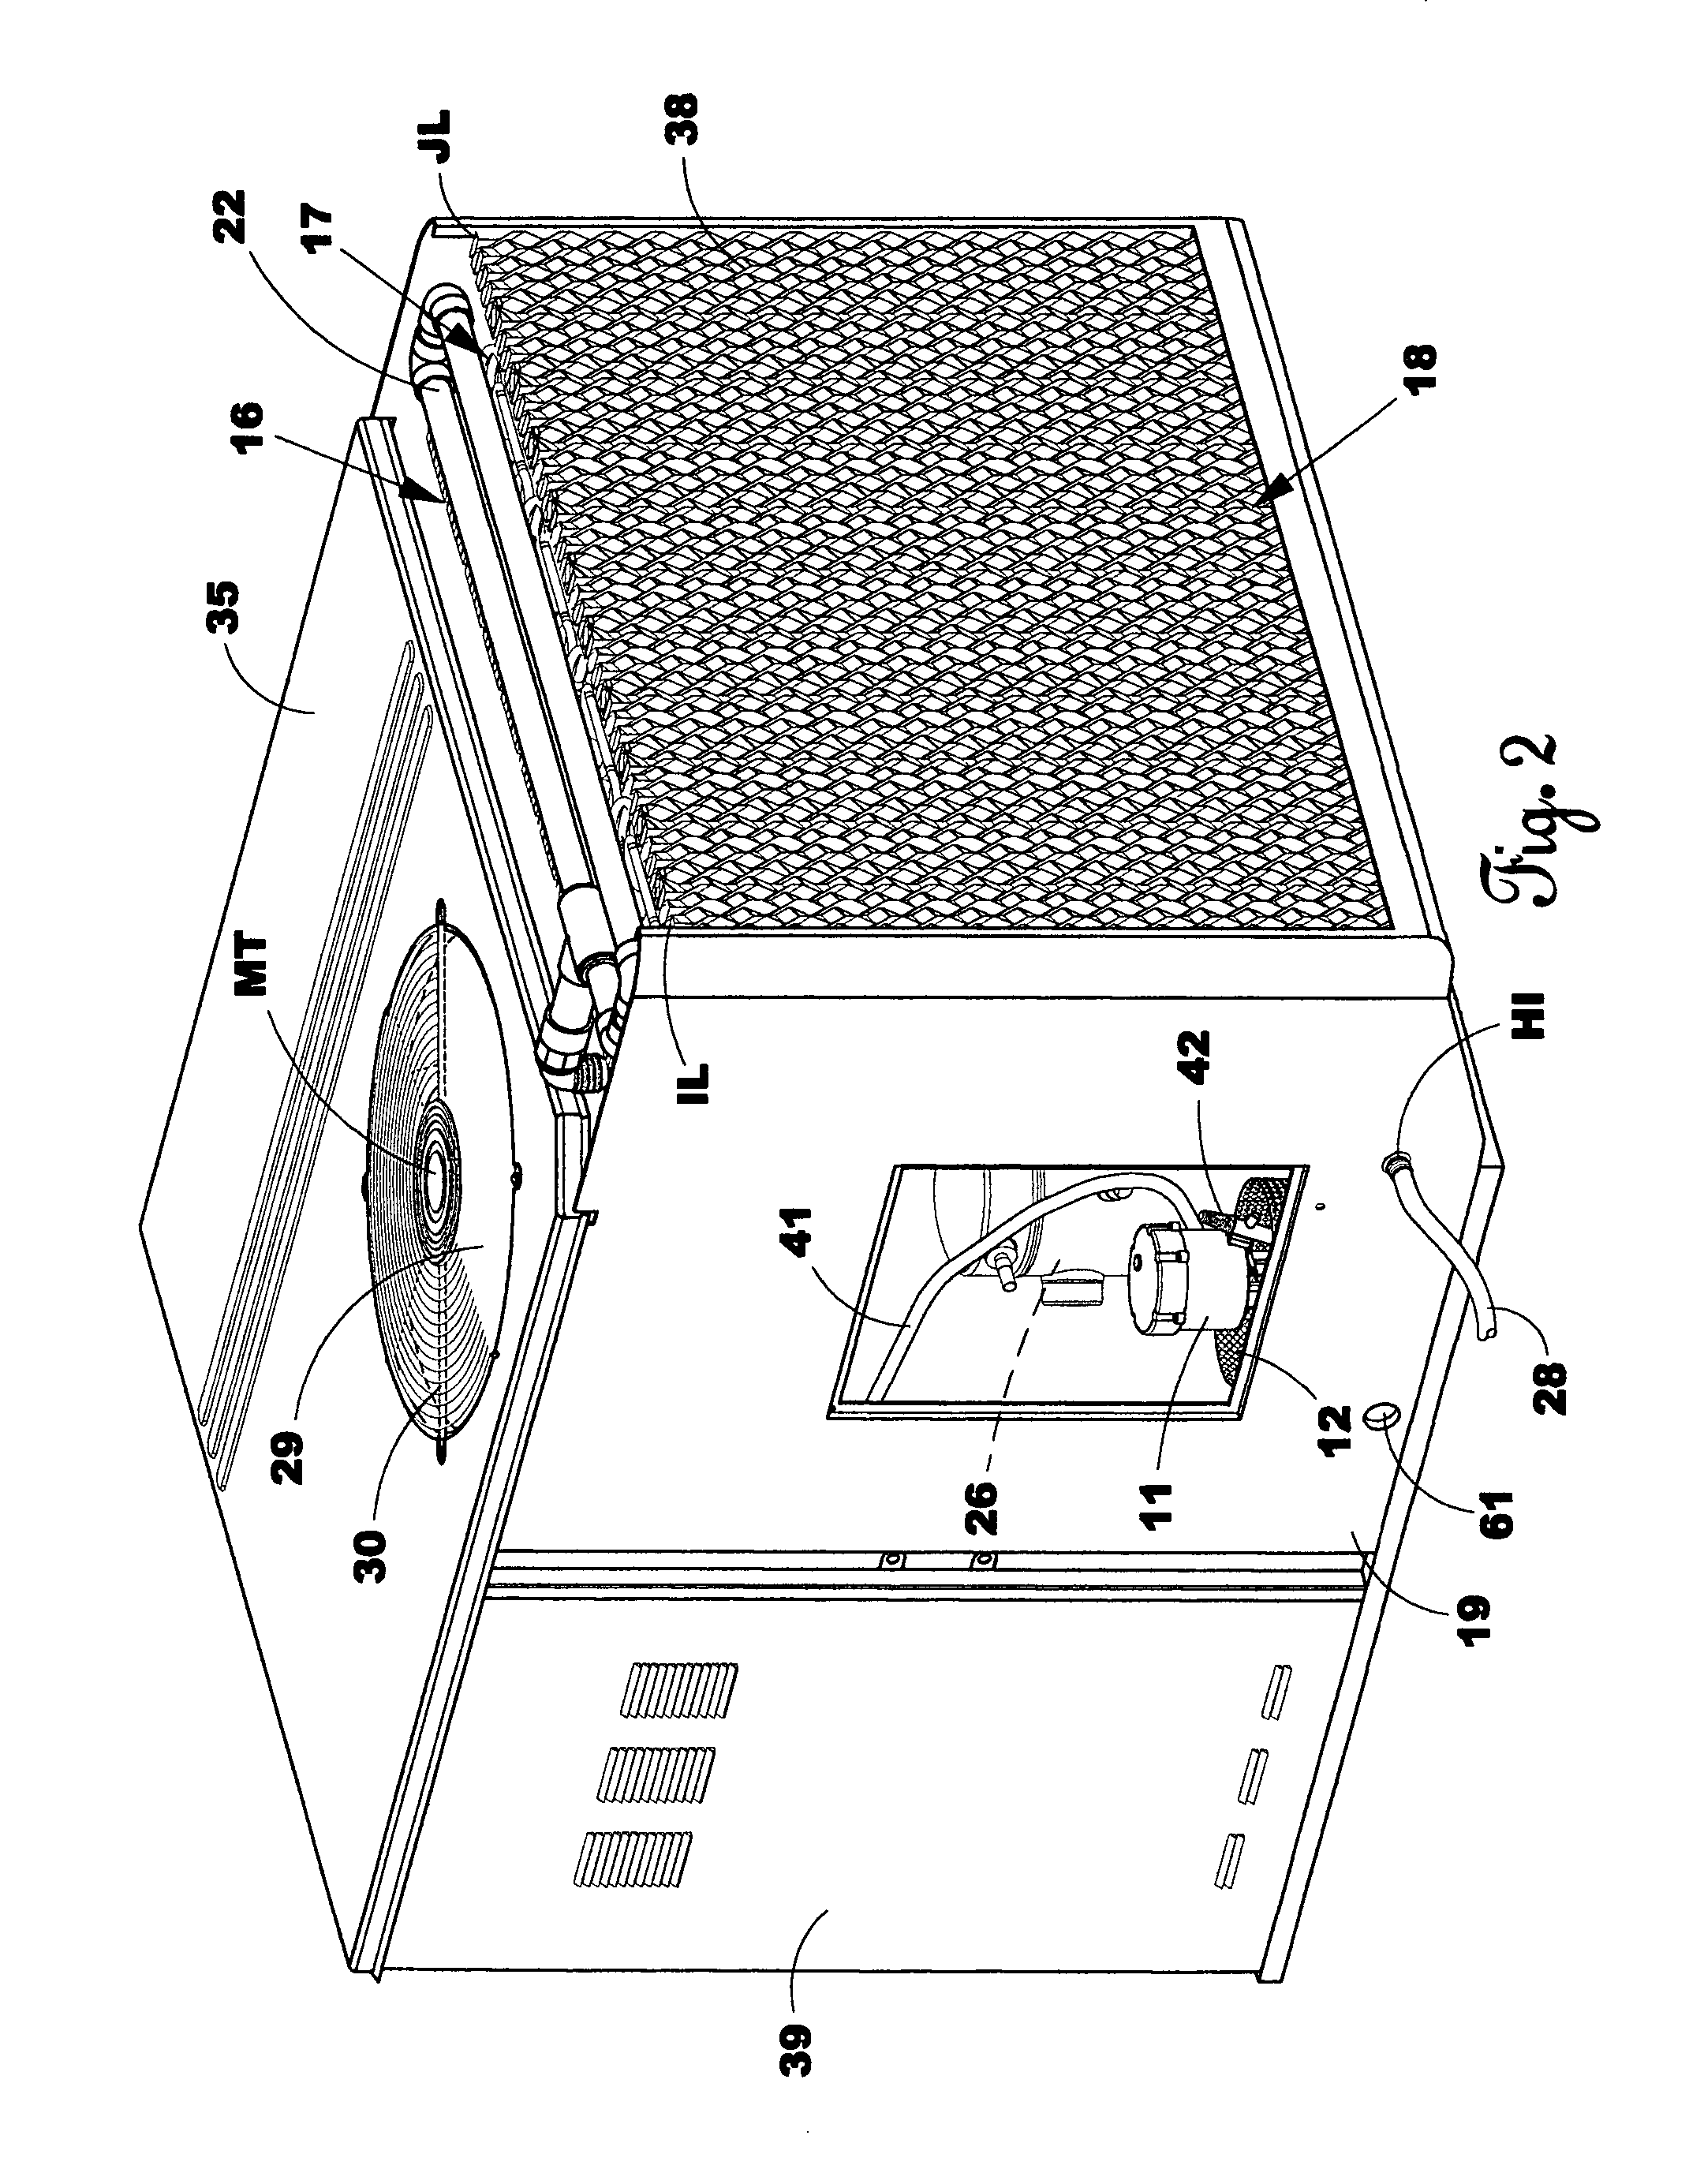 Heat exchanger apparatus and method for evaporative cooling refrigeration unit